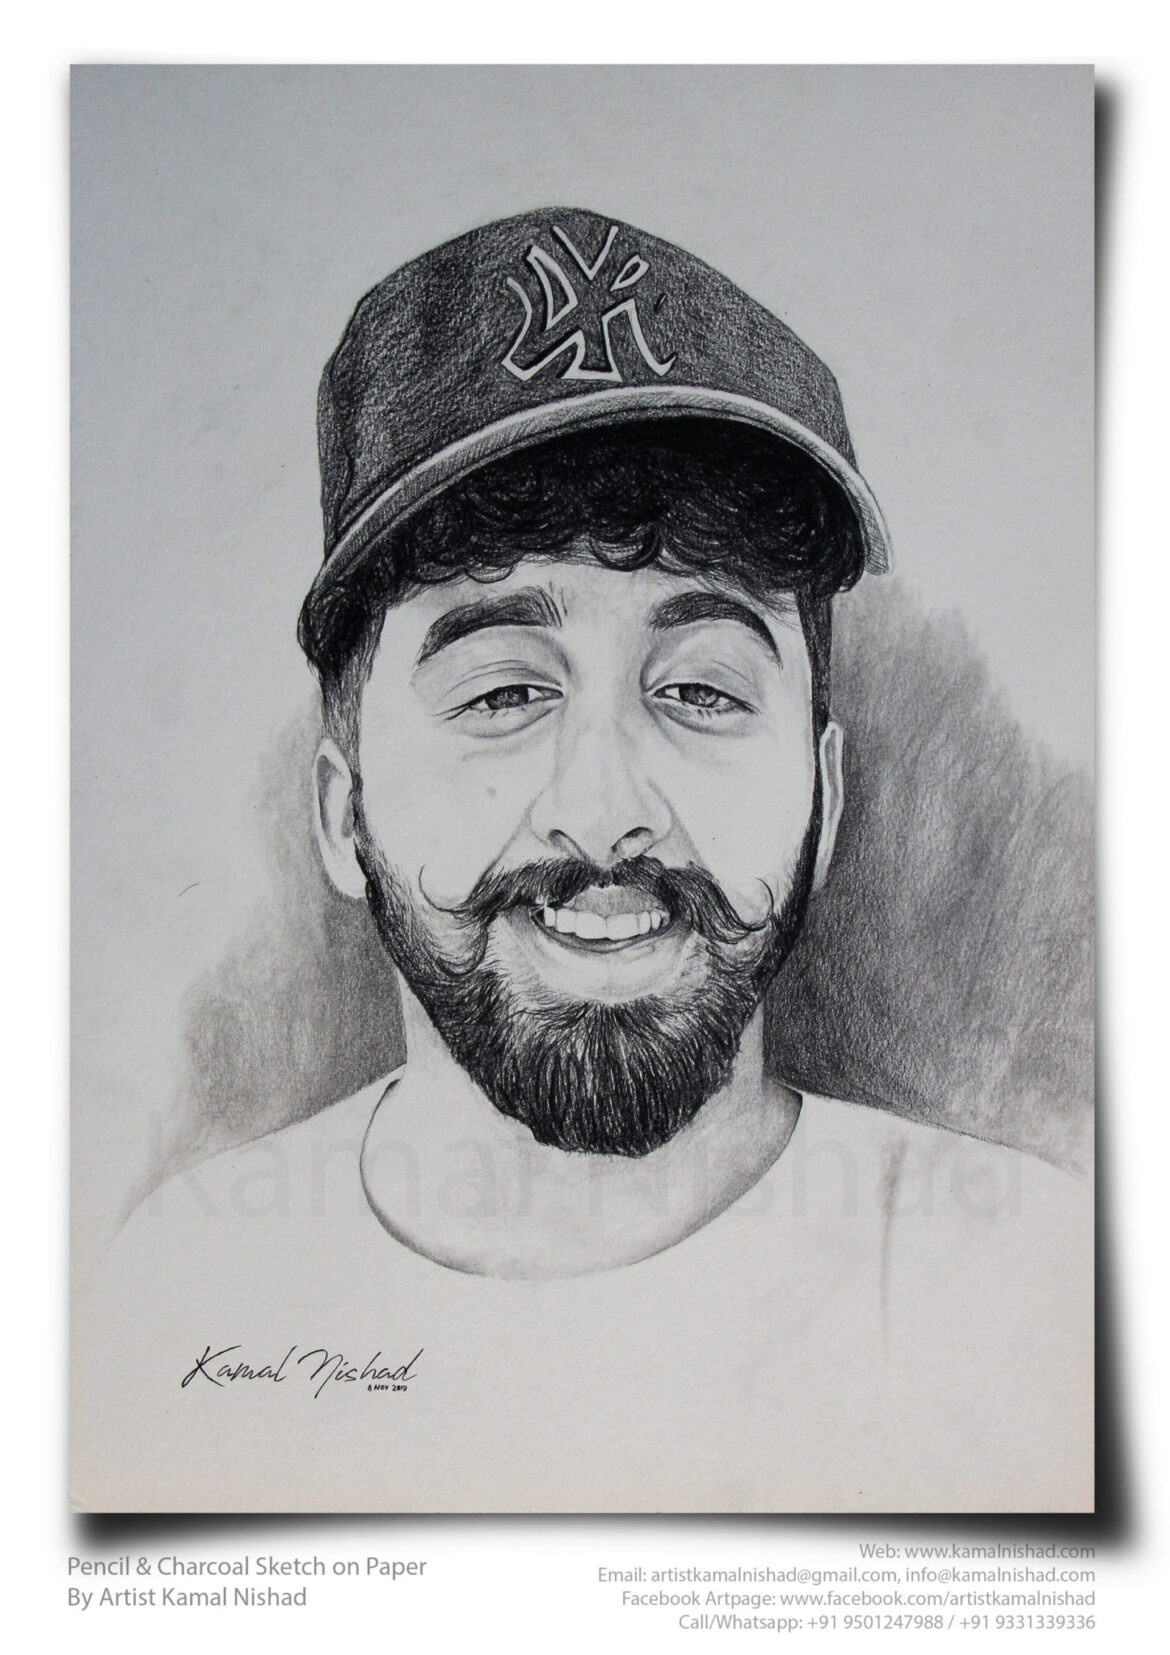 A GLORIOUS SMILE | Pencil & Charcoal Sketch This is a Handmade/hand-drawn Sketch made with Pencil & Charcoal “A GLORIOUS SMILE”. One of my client/customer (FEMALE) wanted me to draw this portrait for a birthday gift. SIZE: A3 Created by © Kamal Nishad. All rights reserved.